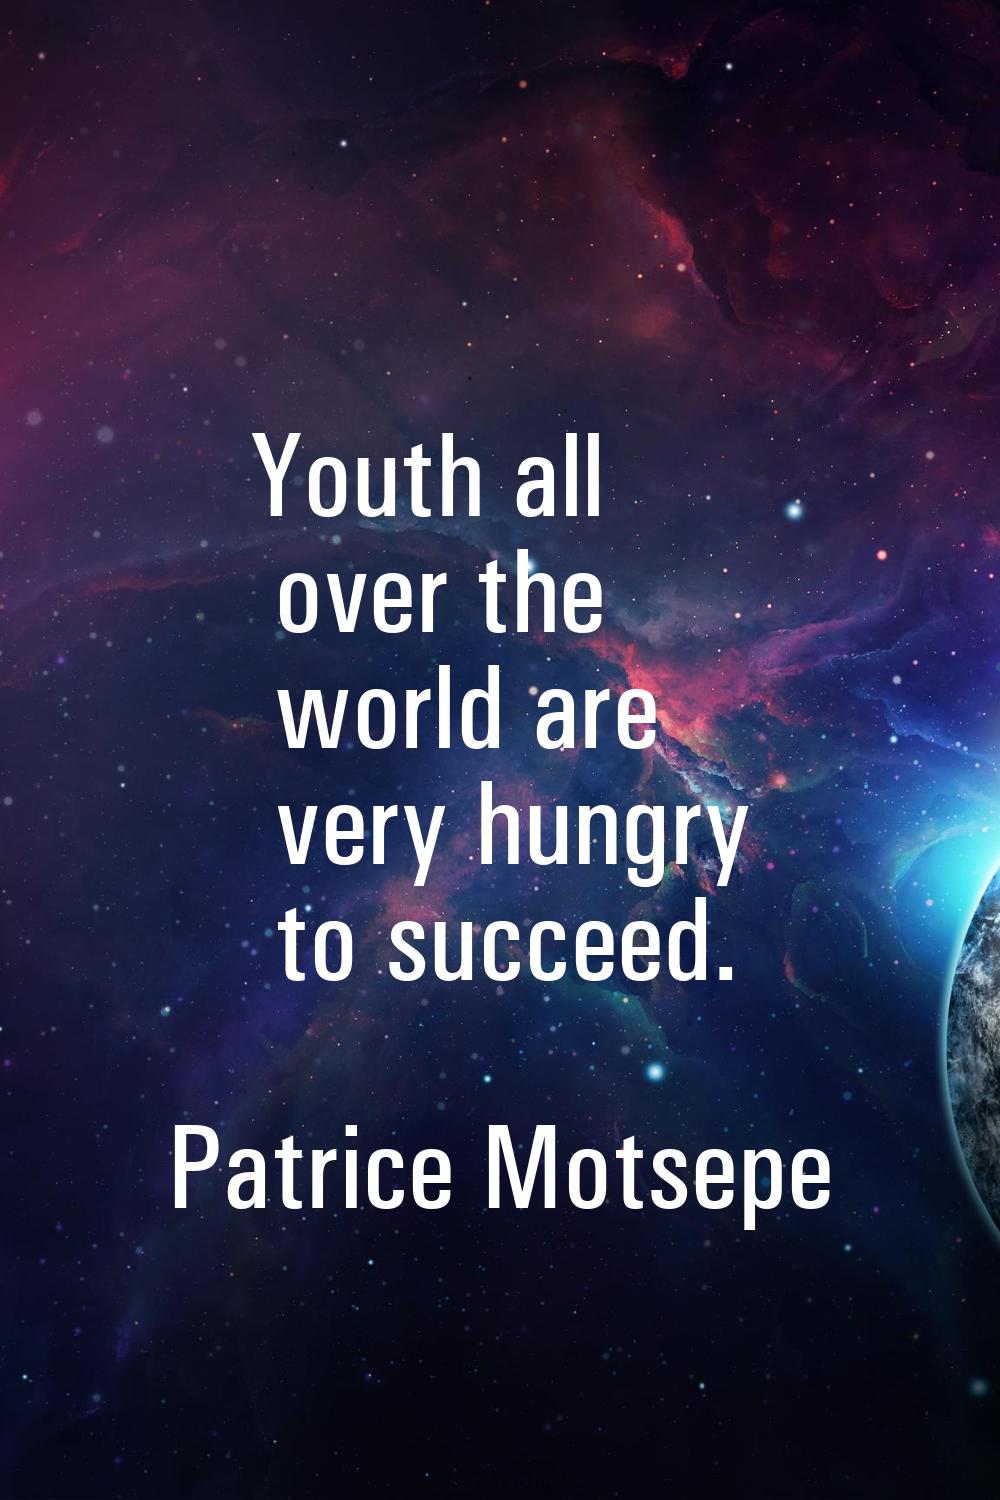 Youth all over the world are very hungry to succeed.